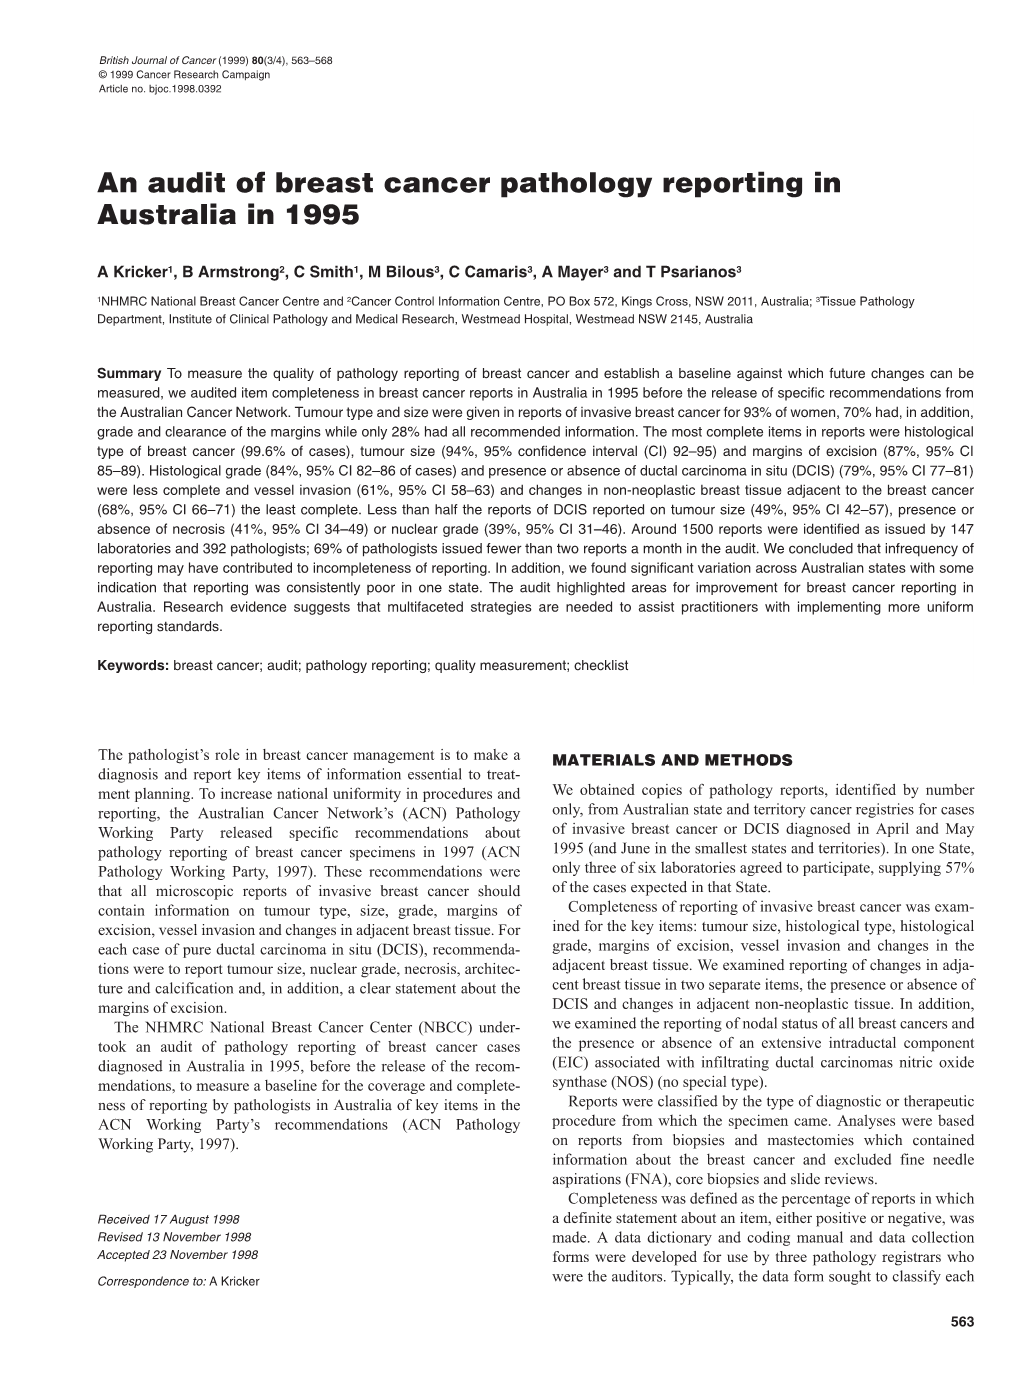 An Audit of Breast Cancer Pathology Reporting in Australia in 1995